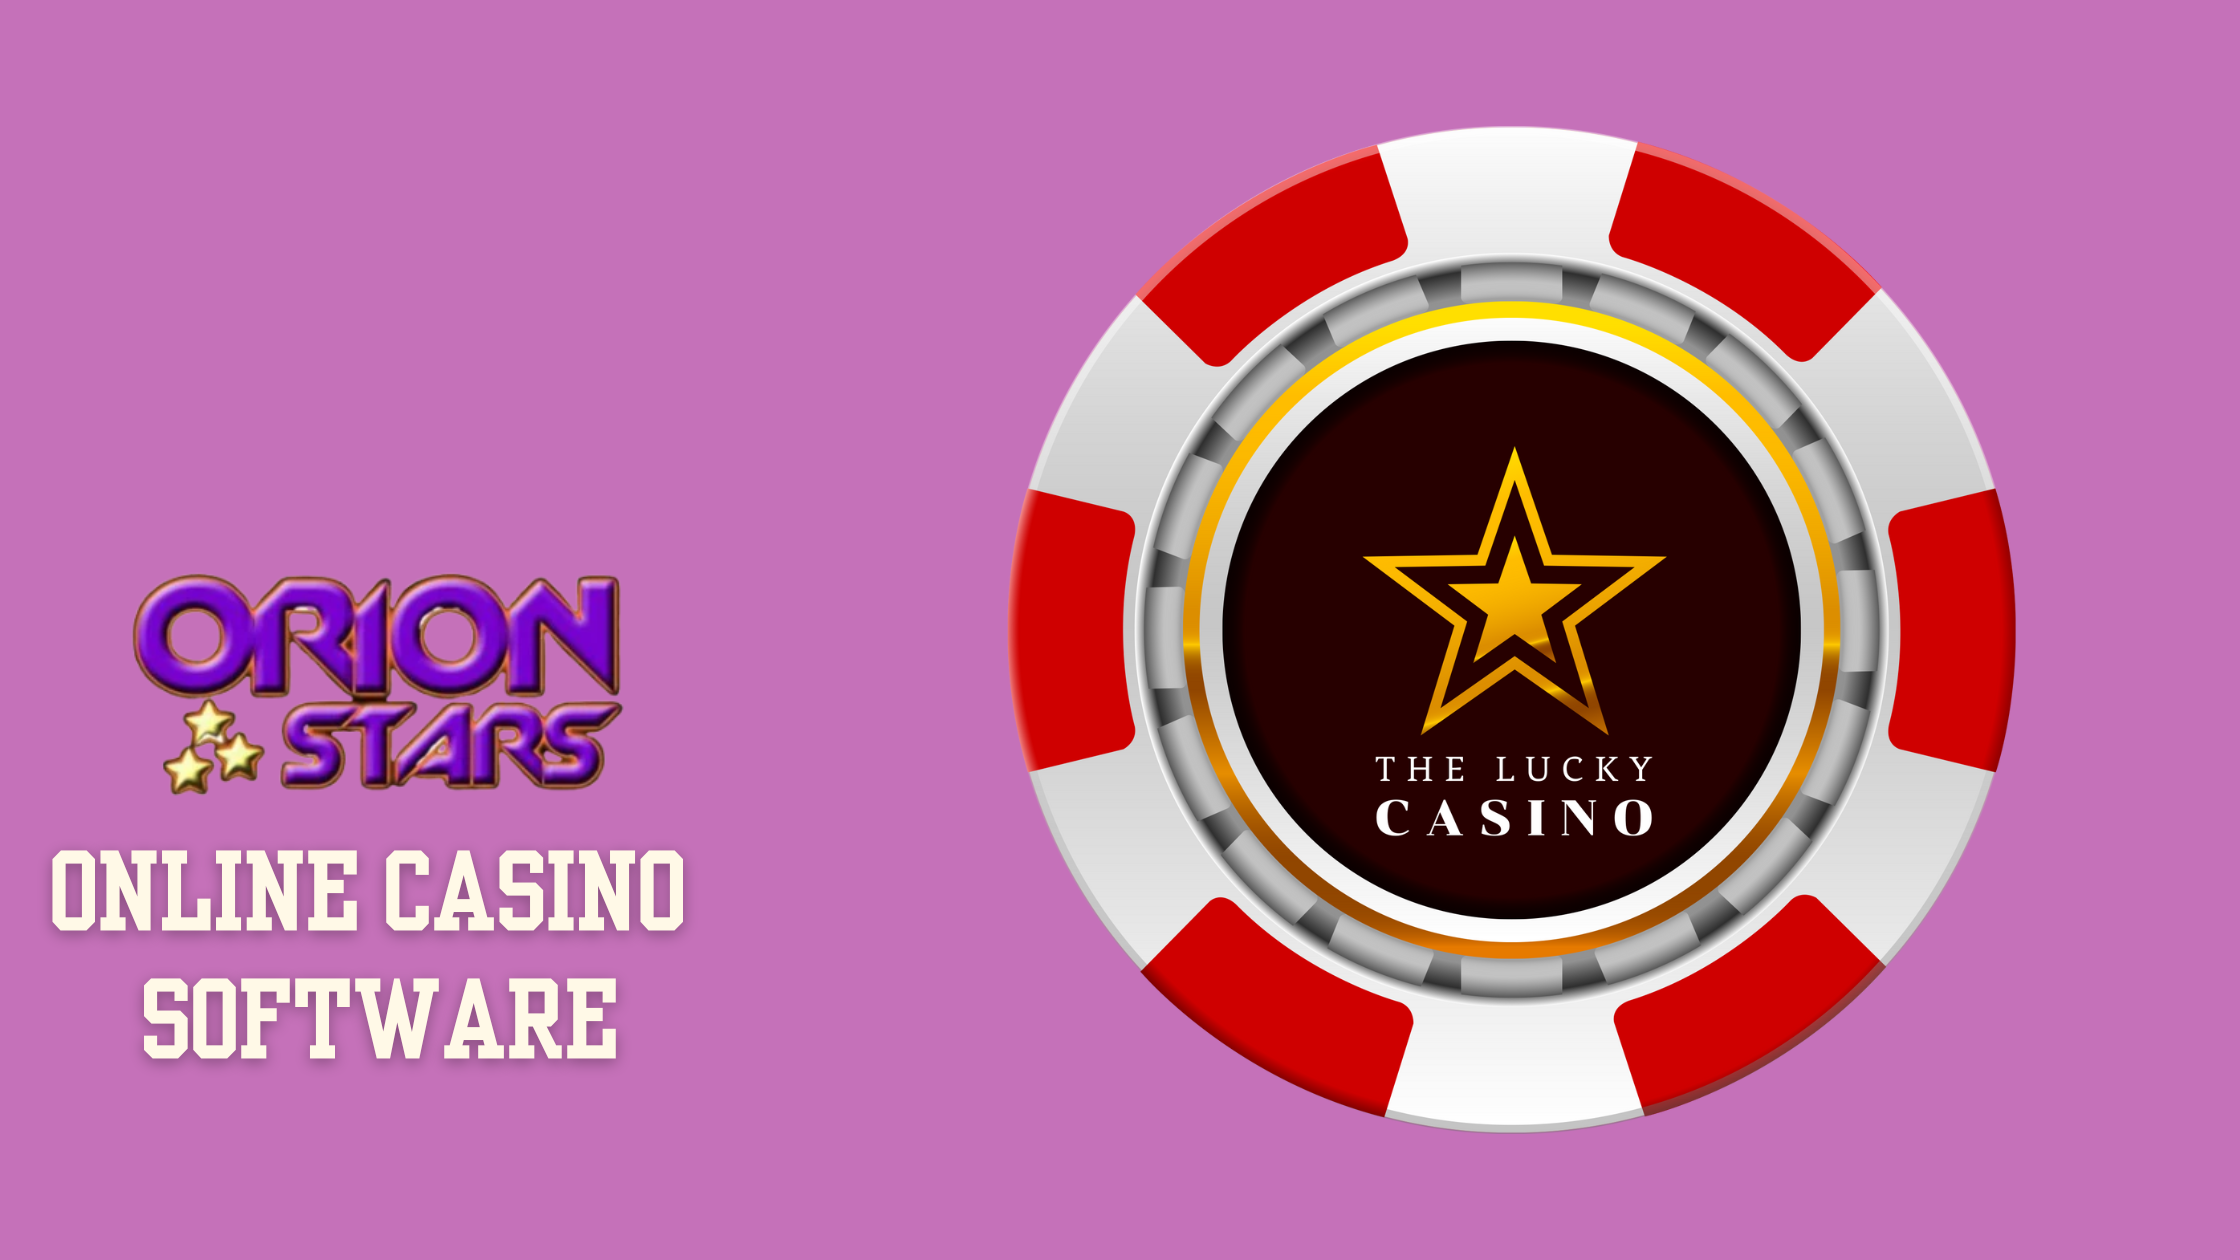 Online Casino Software: Your Path to Riches